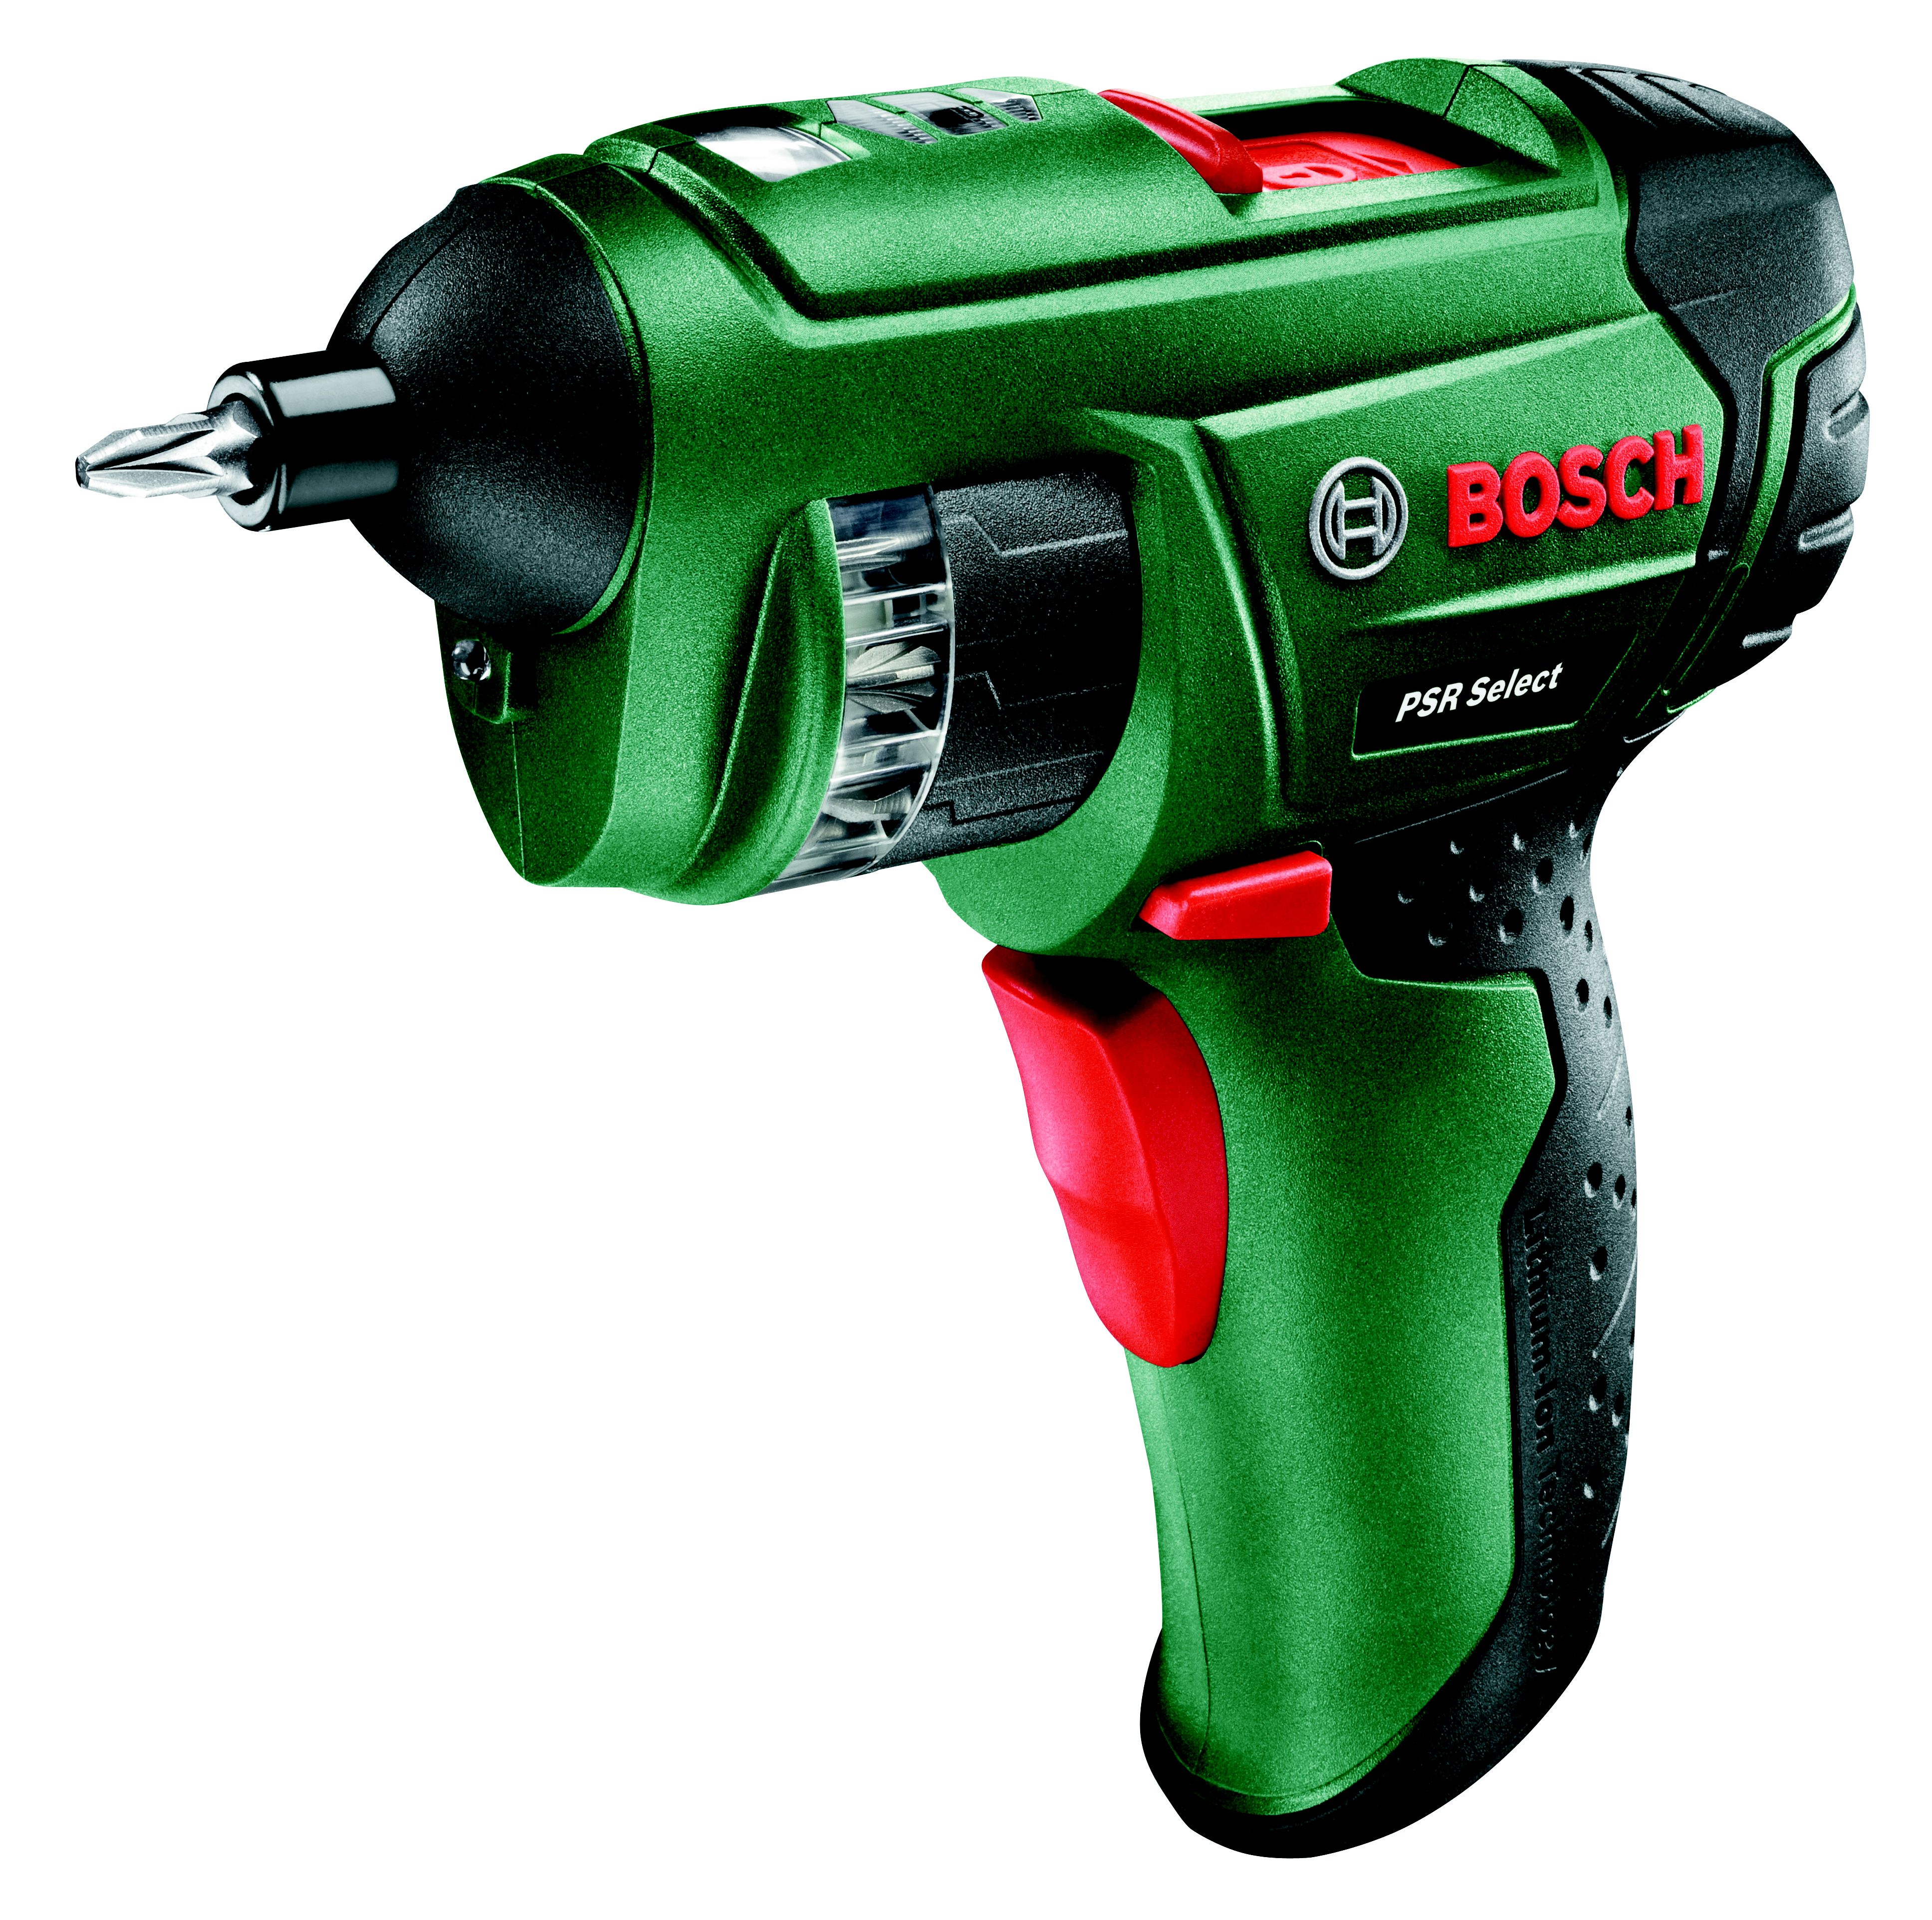 BOSCH IXO V FULL KIT 3.6V 1.5Ah Li-Ion Cordless Screwdriver with Angle and  Off-Set Attachments and 10 Bits